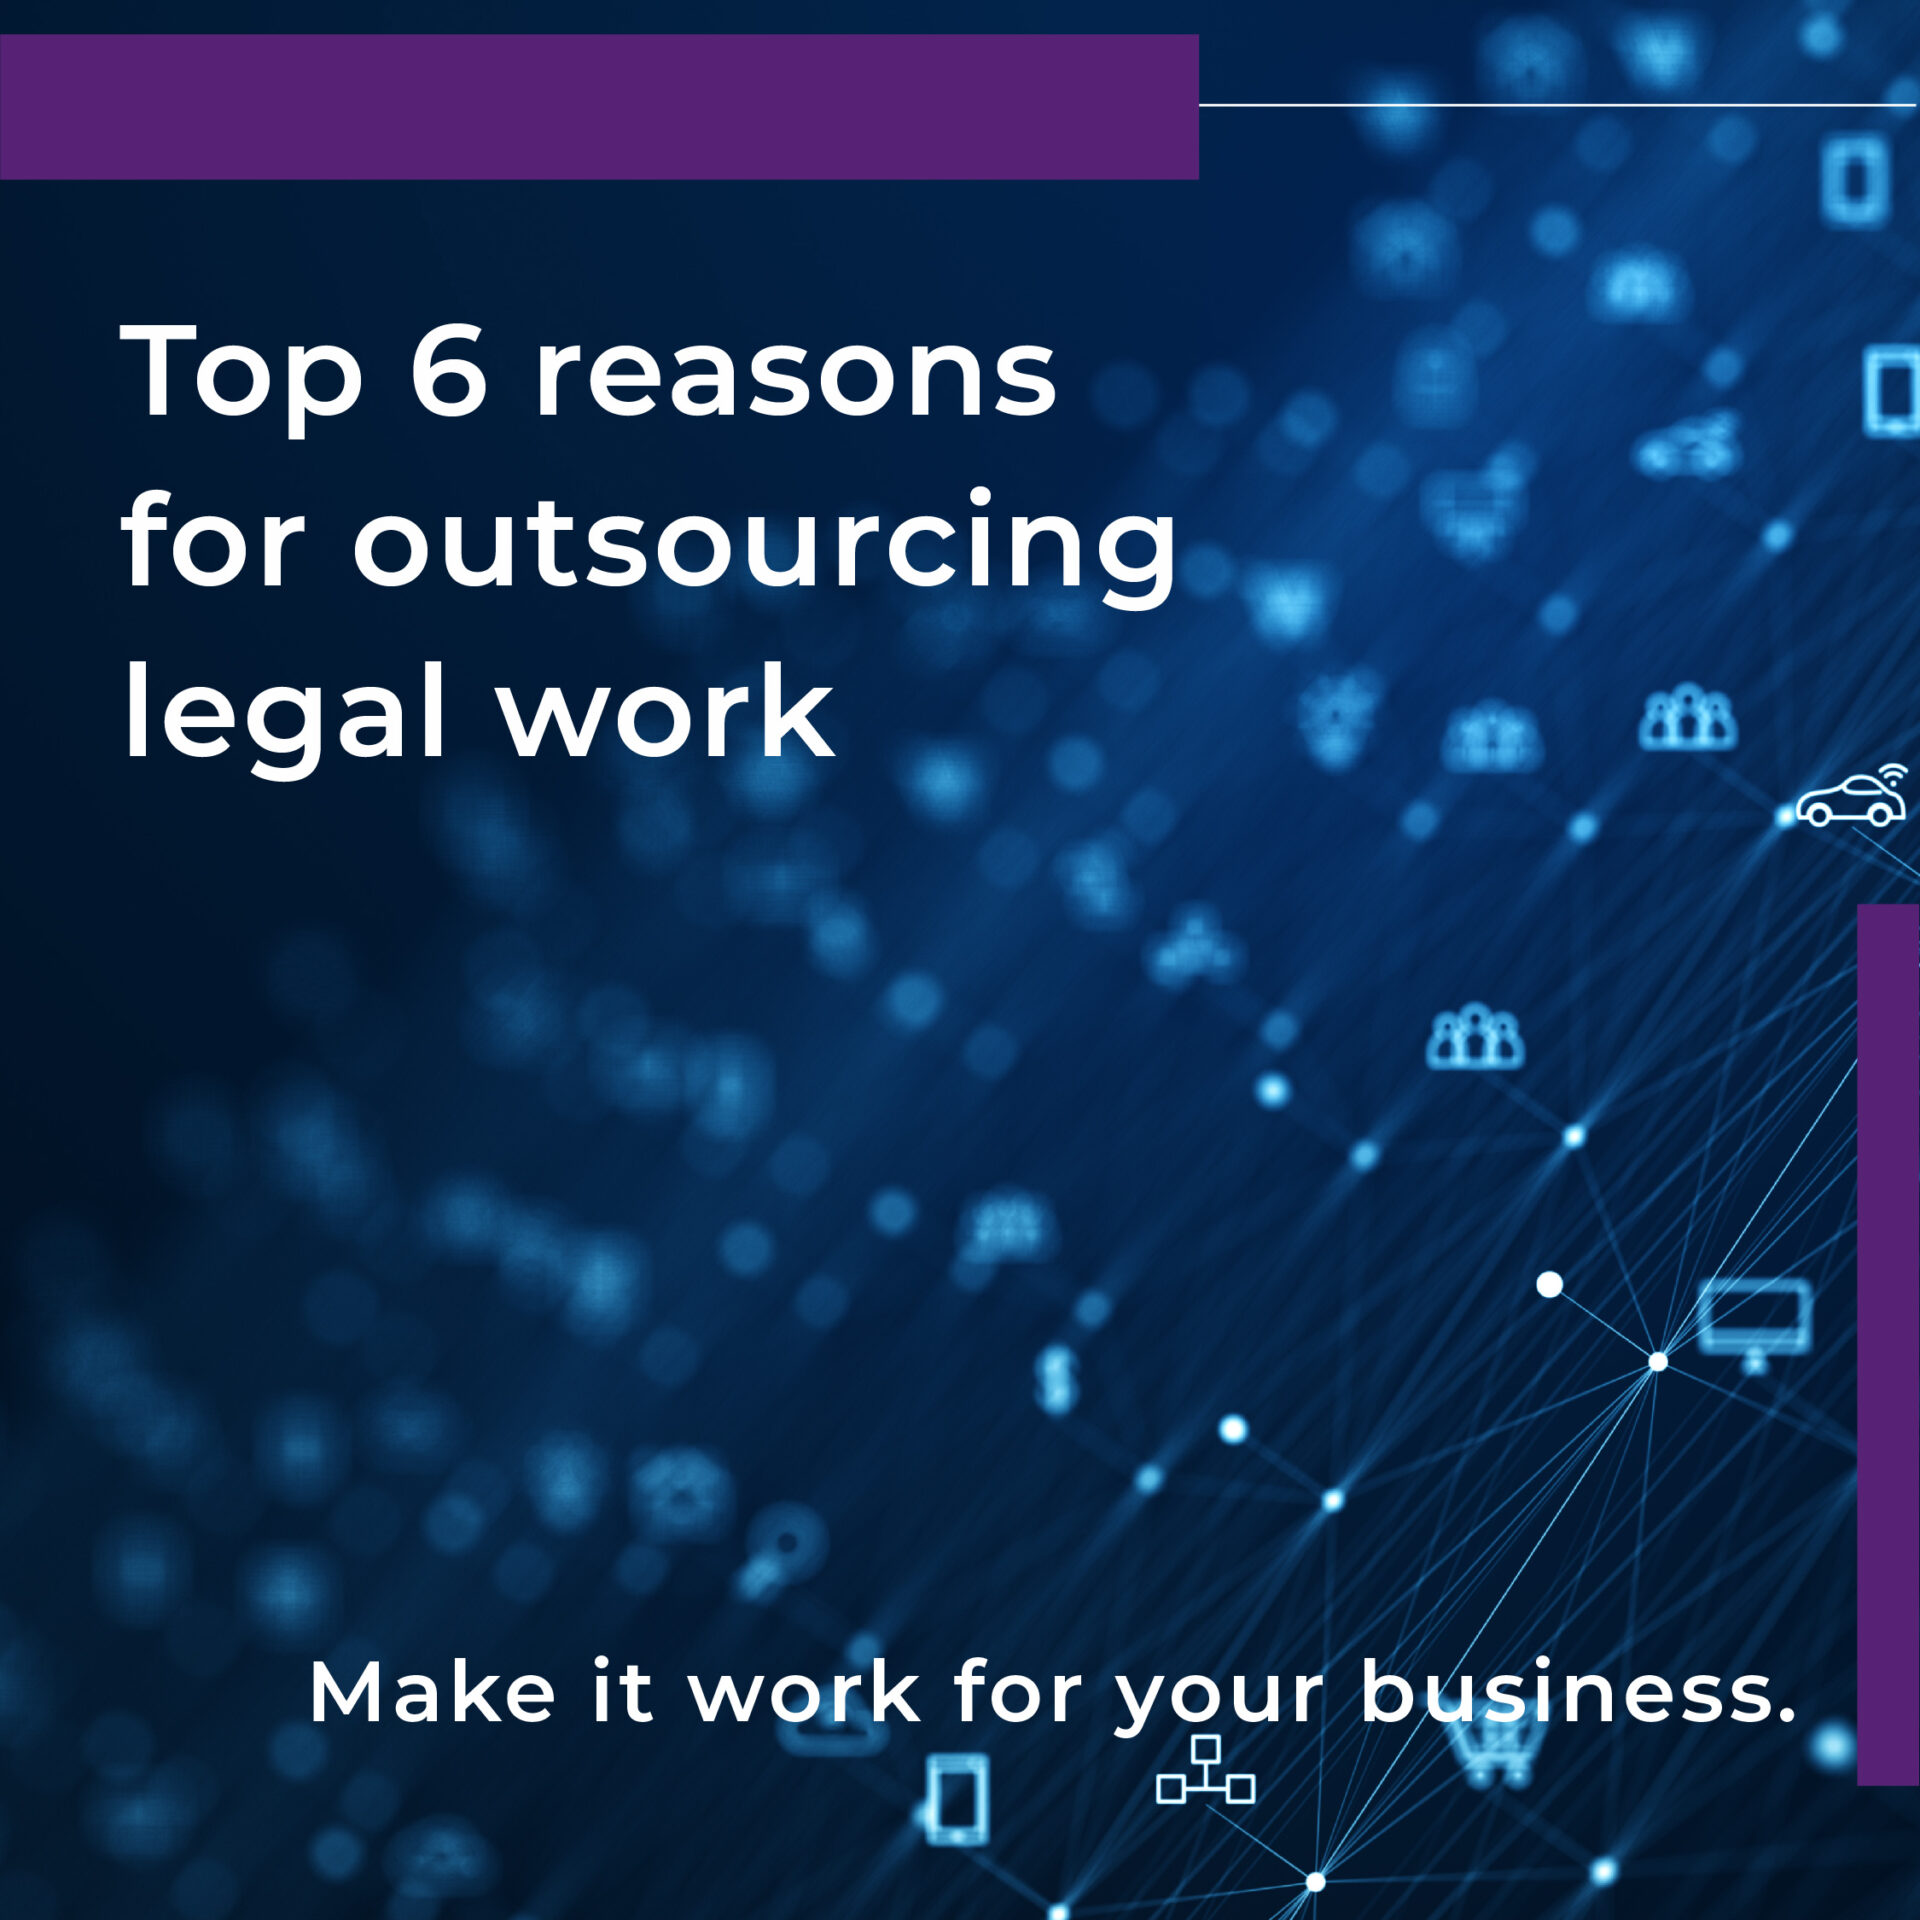 Top 6 reasons for outsourcing legal work